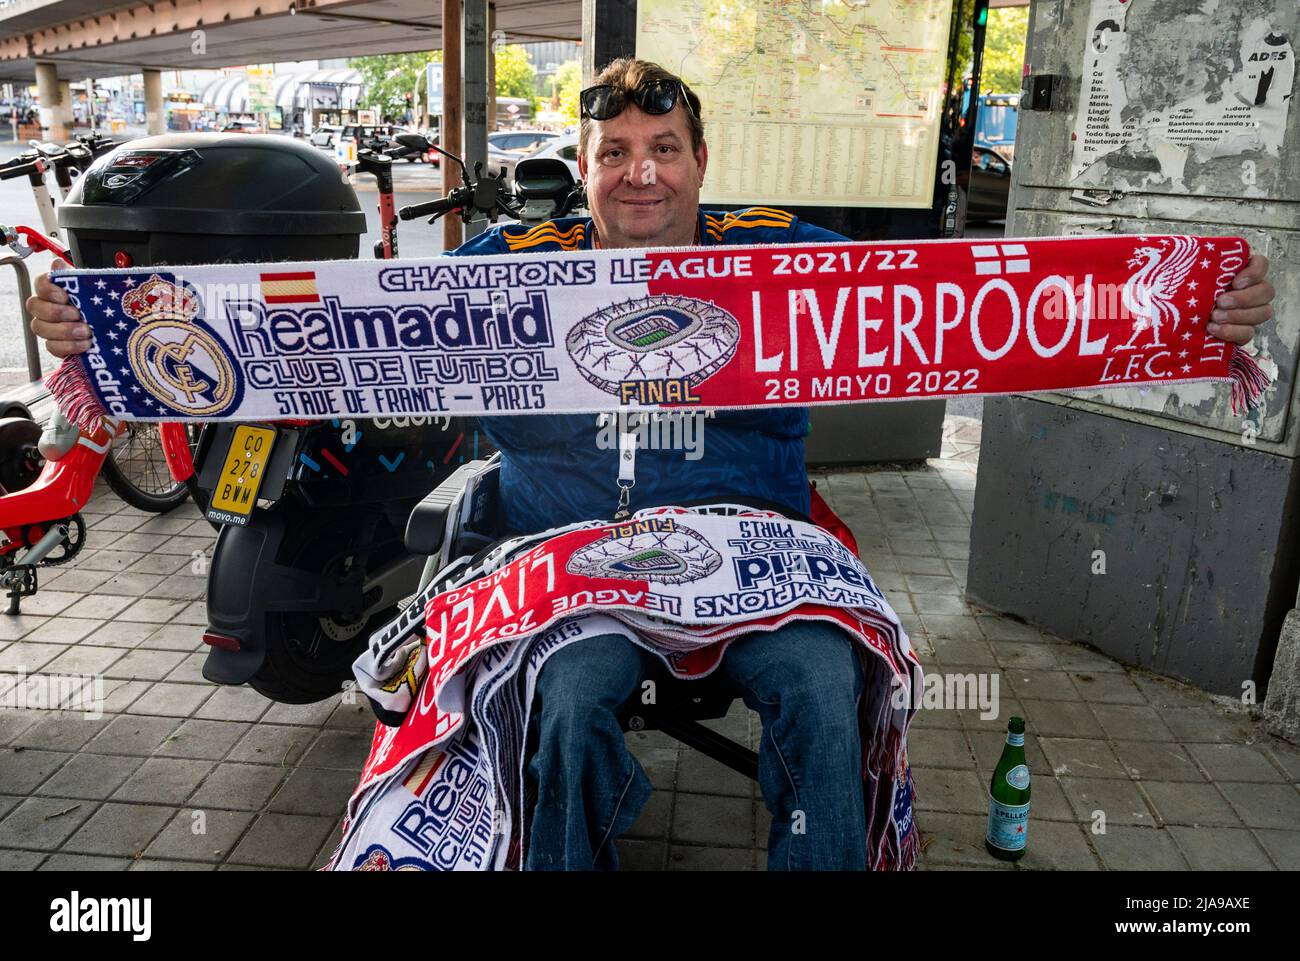 Madrid, Spain. 29th May, 2022. A stall vendor poses with a scarf  commemorating the 2022 UEFA Champions League final match between Liverpool  and Real Madrid in Madrid. Real Madrid won its 14th